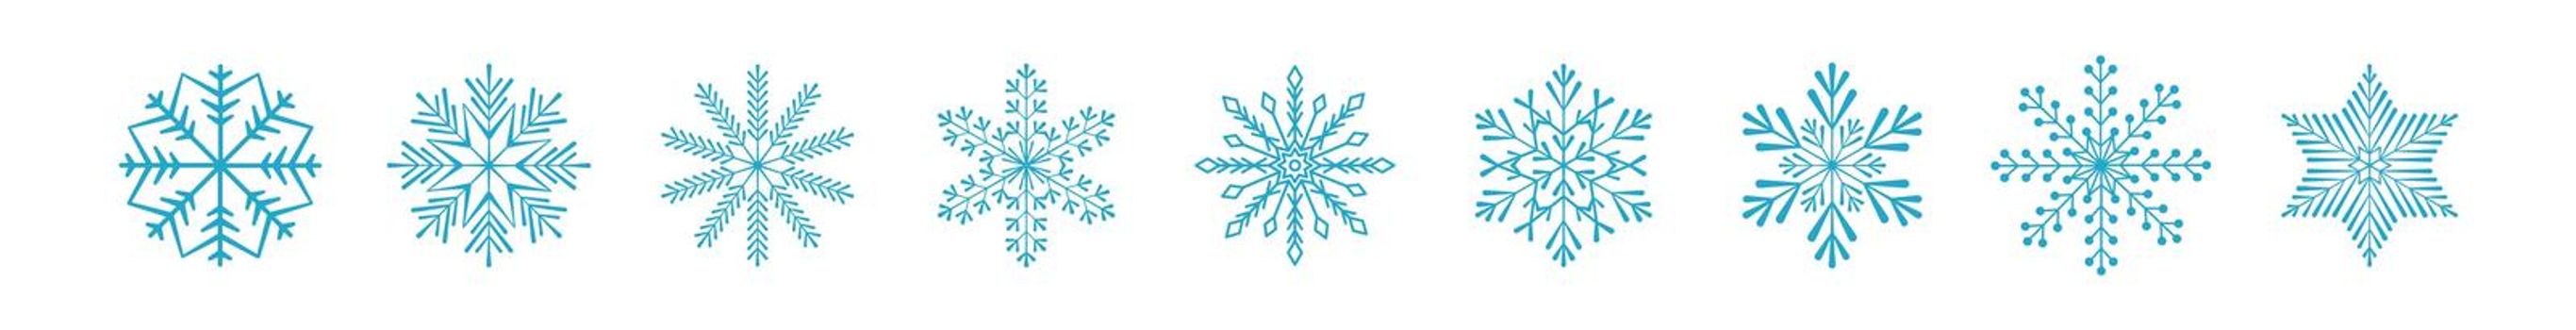 Frozen snowflake symbol collection vector illustration. SImple line blue snowflakes isolated on white background for abstract christmas celebration design or winter season decoration ornament